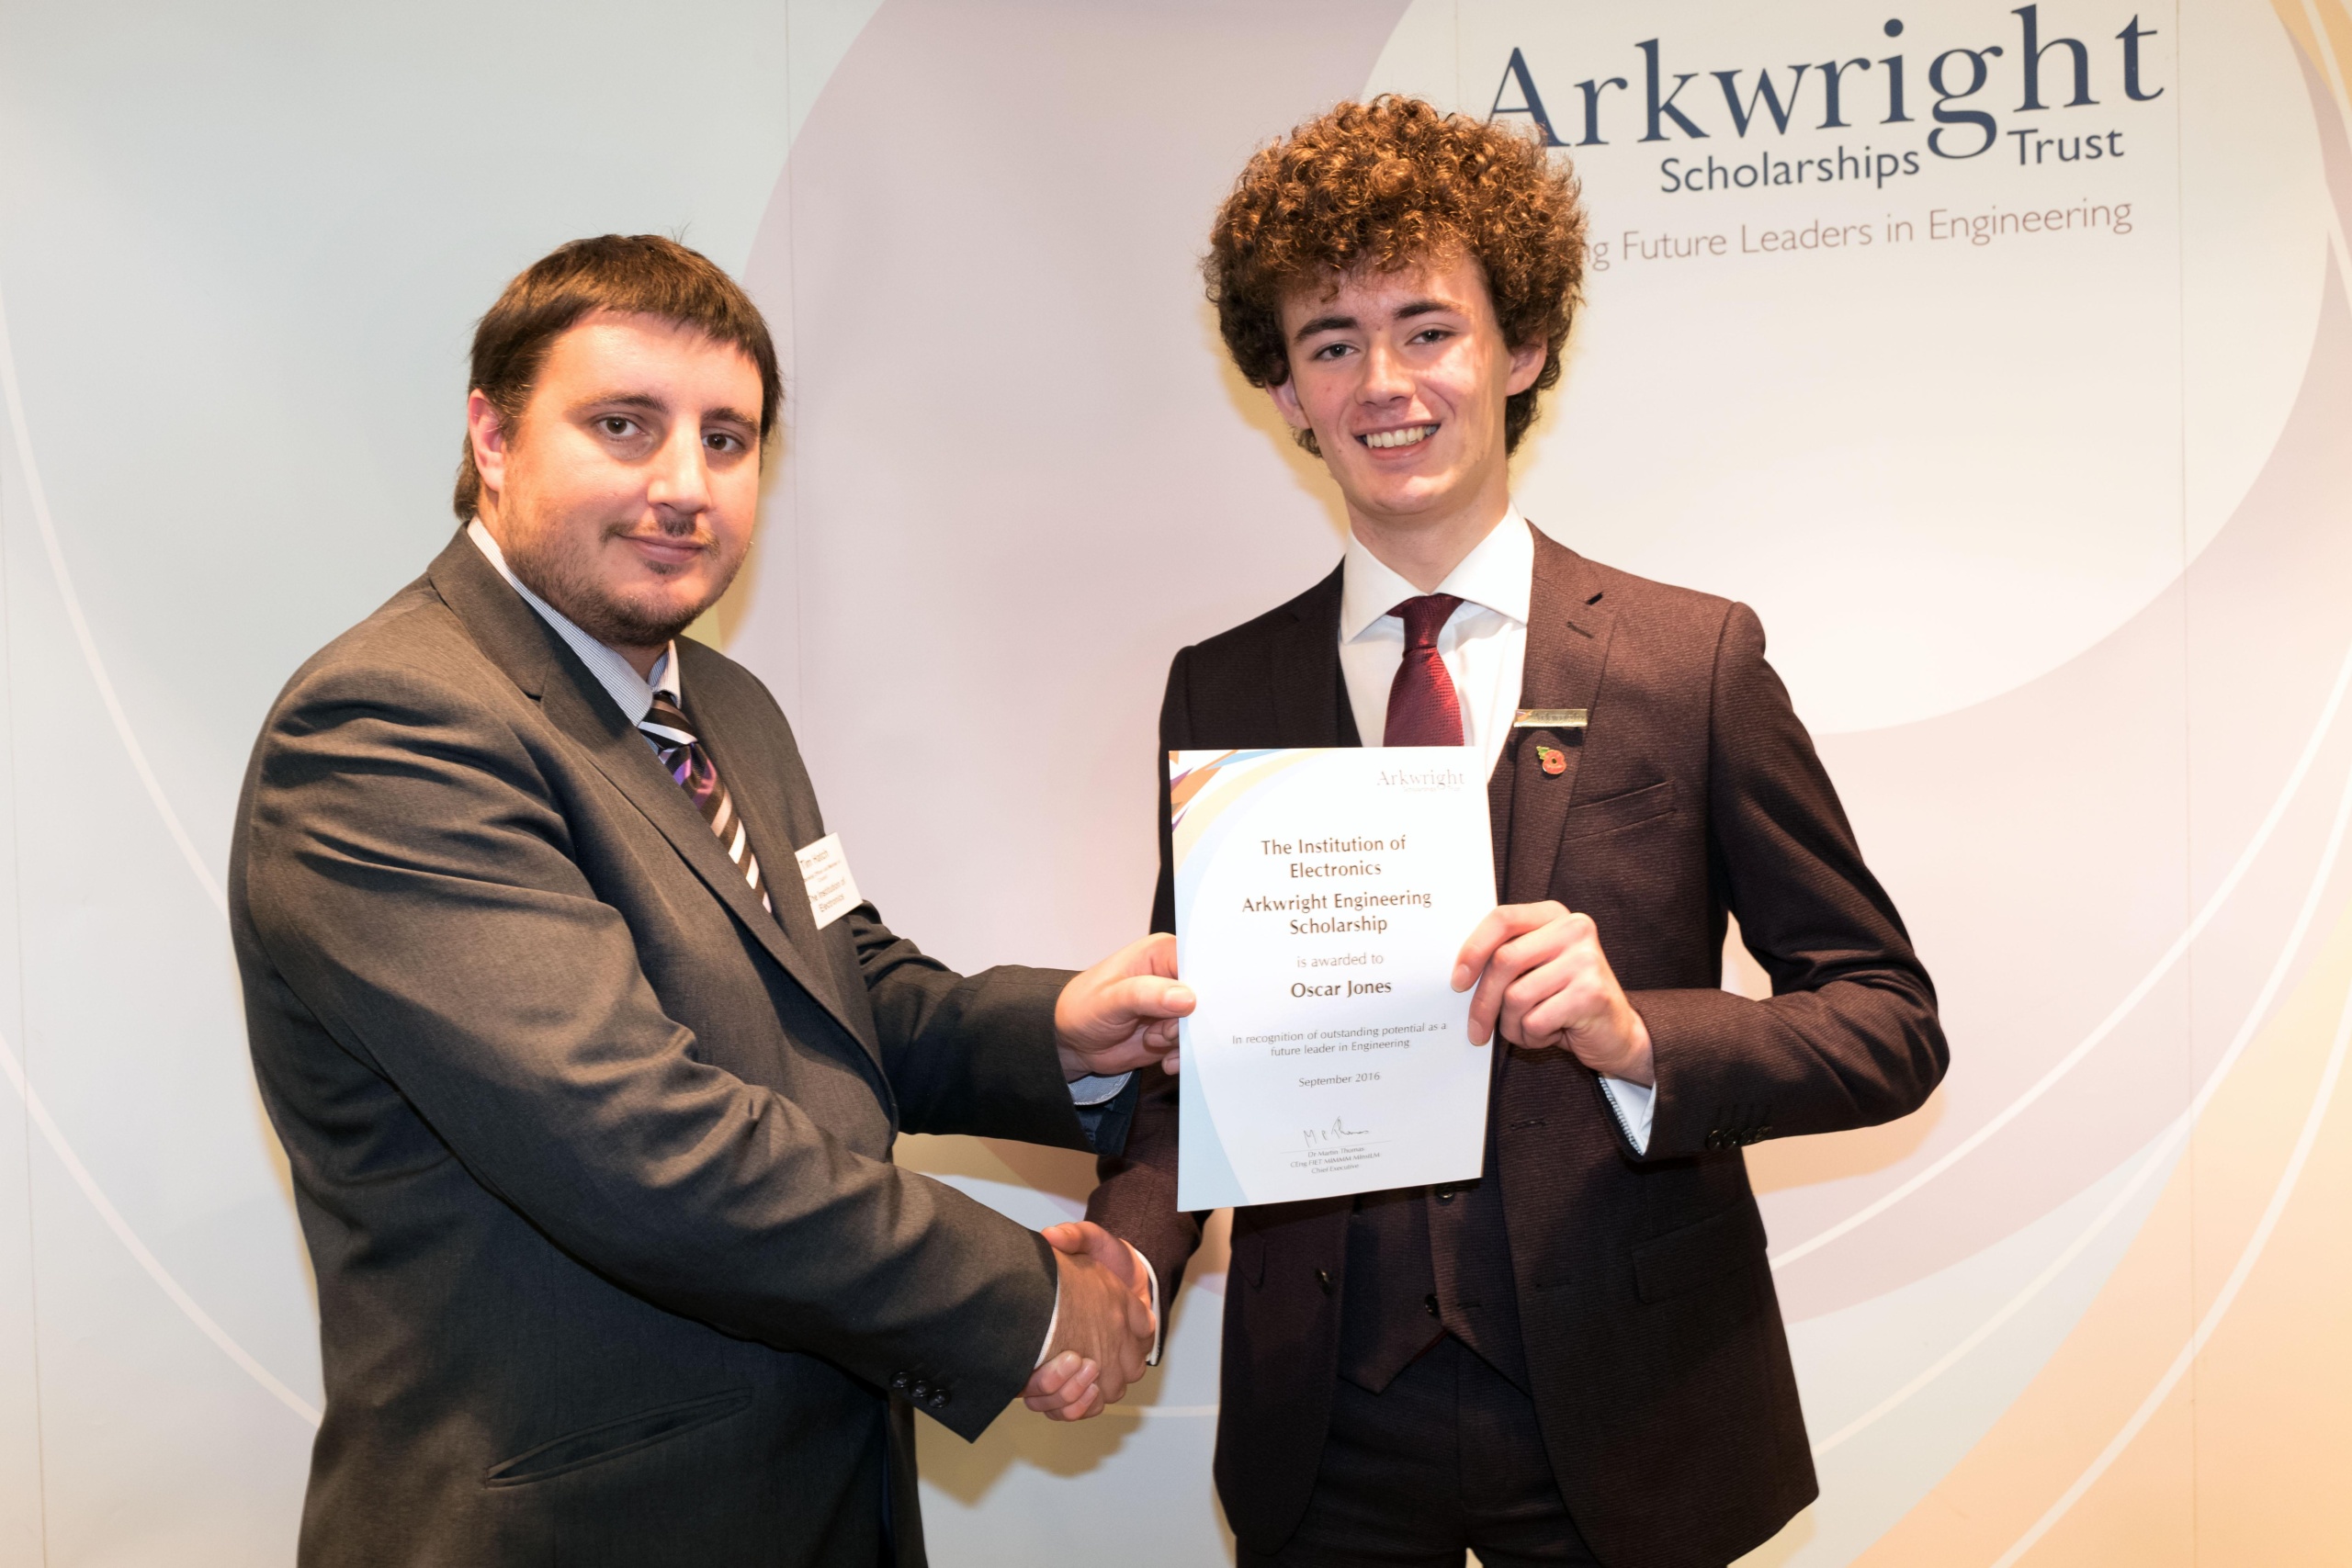 cheadle hulme school sixth form student Oscar collects his Arkwright Engineering Scholarship in Edinburgh with a representative from the Institute of Electronics